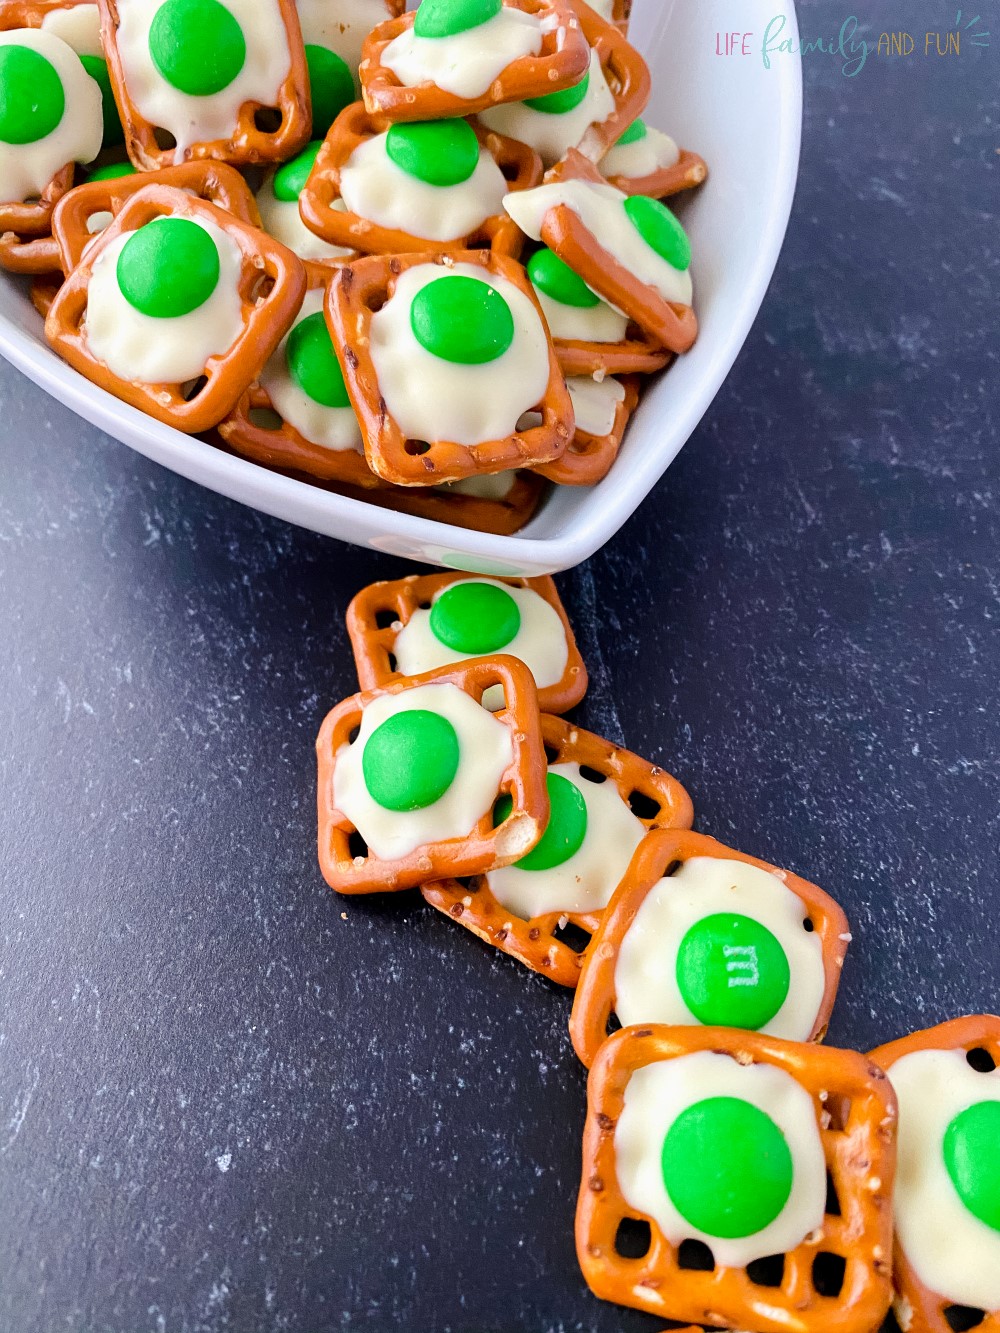 Green Eggs and Ham, Chocolate Covered Pretzels (13)